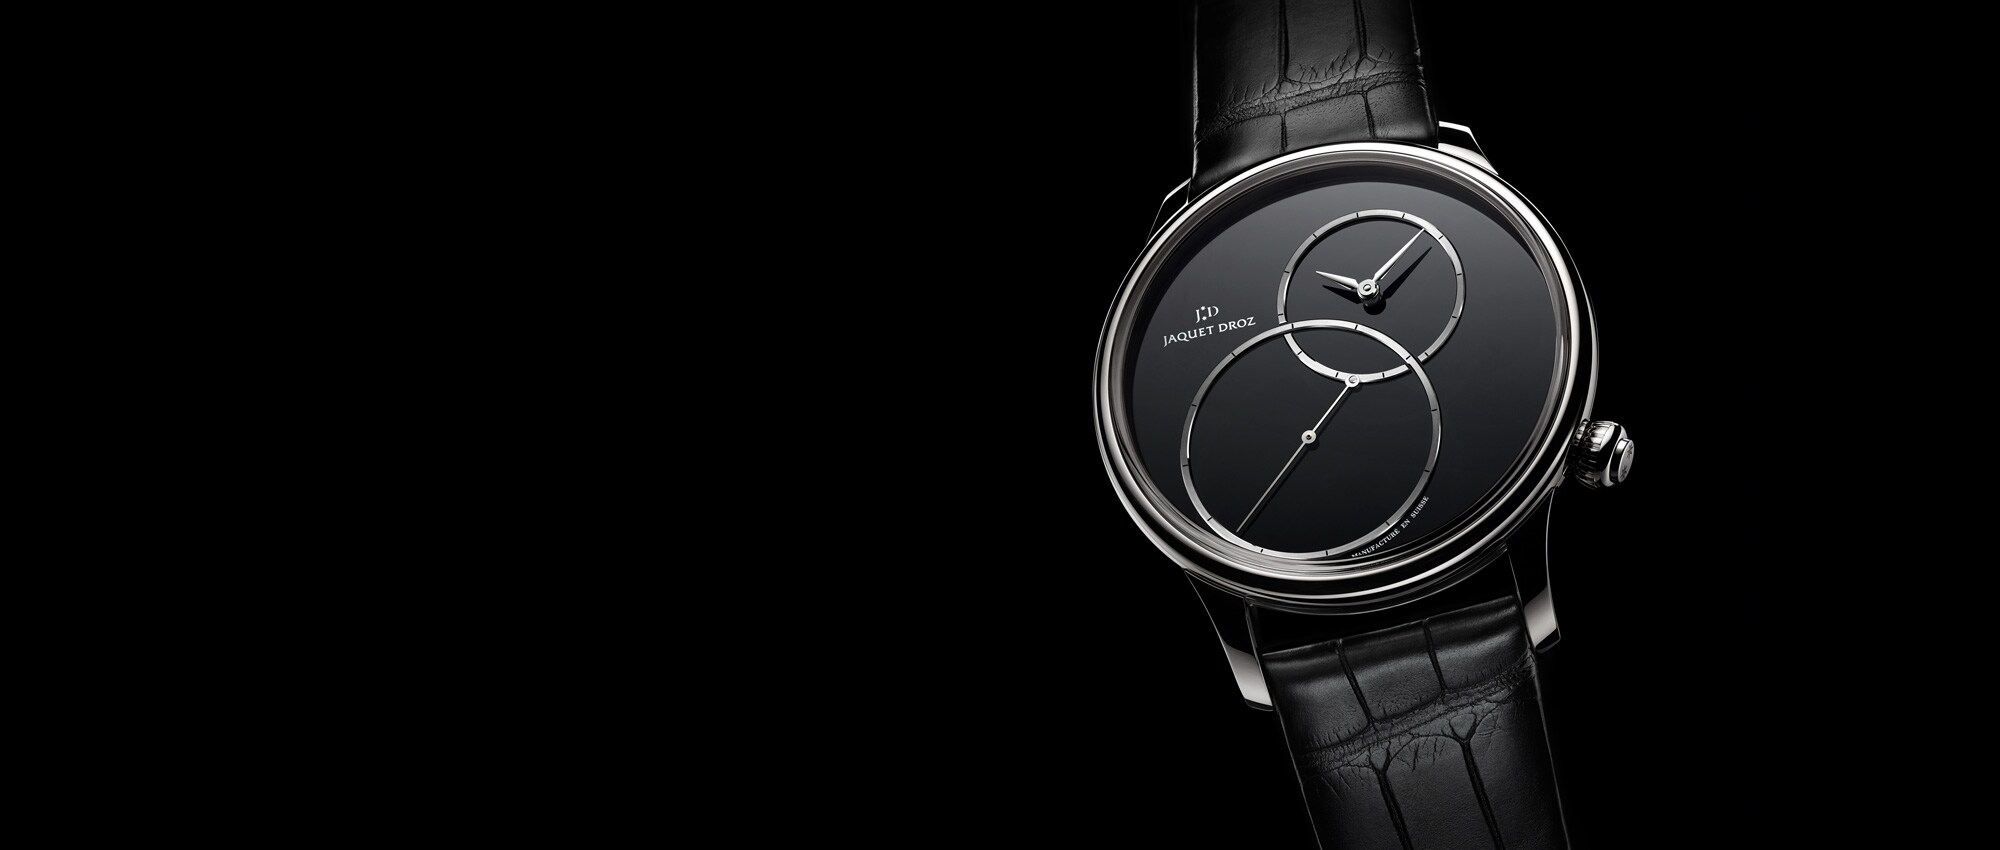 Baselworld 2016 Preview: Grande Seconde Off-Centered Onyx, the essence of blackAvant-première Baselworld 2016 : Grande Seconde Décentrée, l’essence du noir